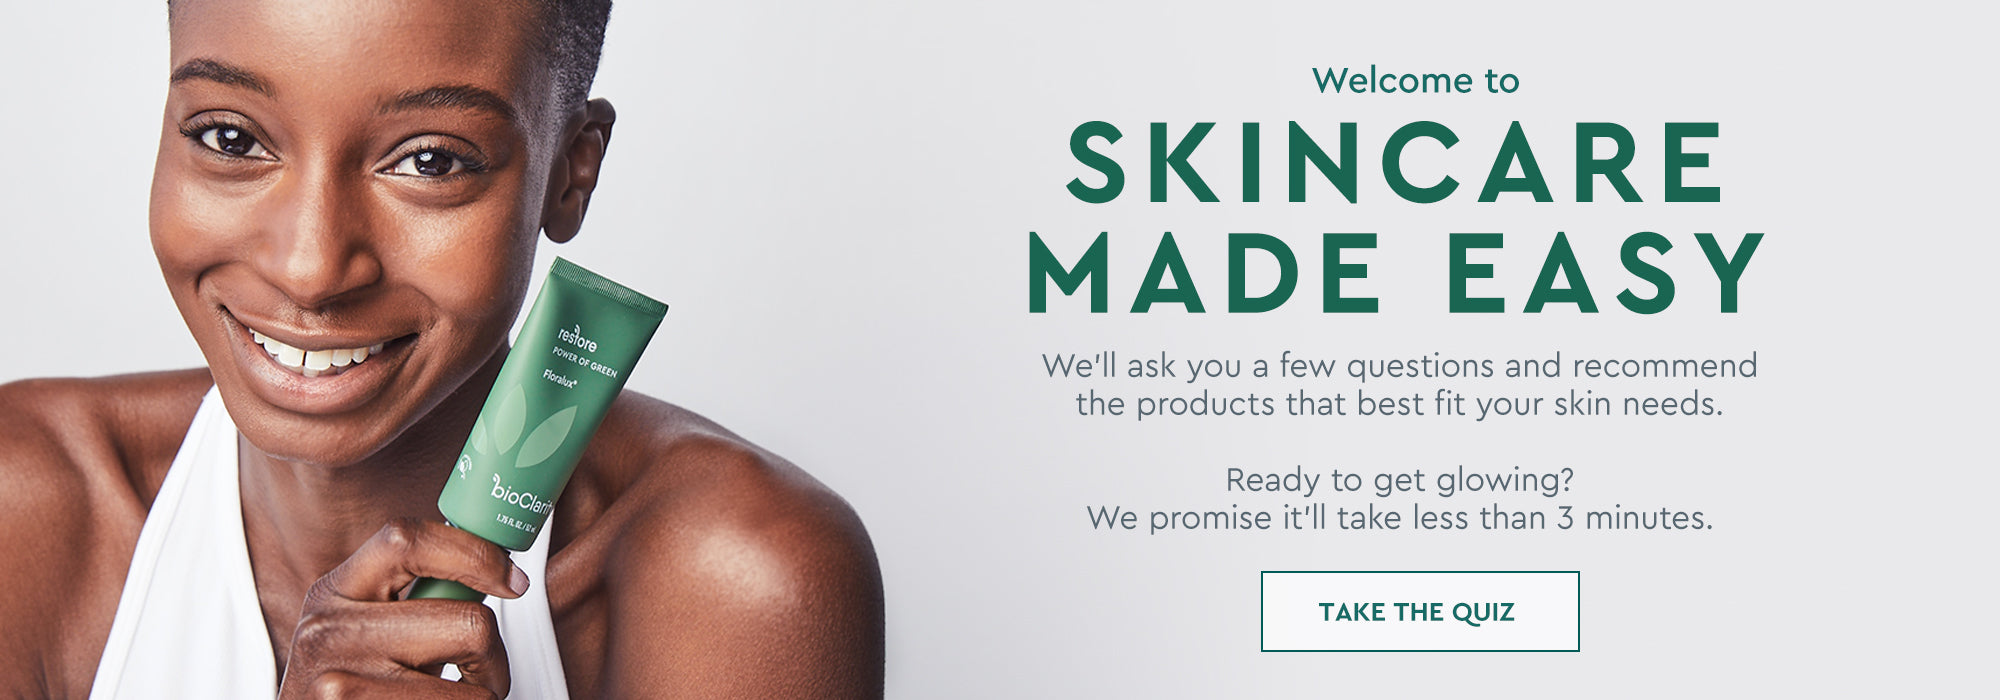 Welcome to Skincare Made Easy - Follow link to start the skin quiz